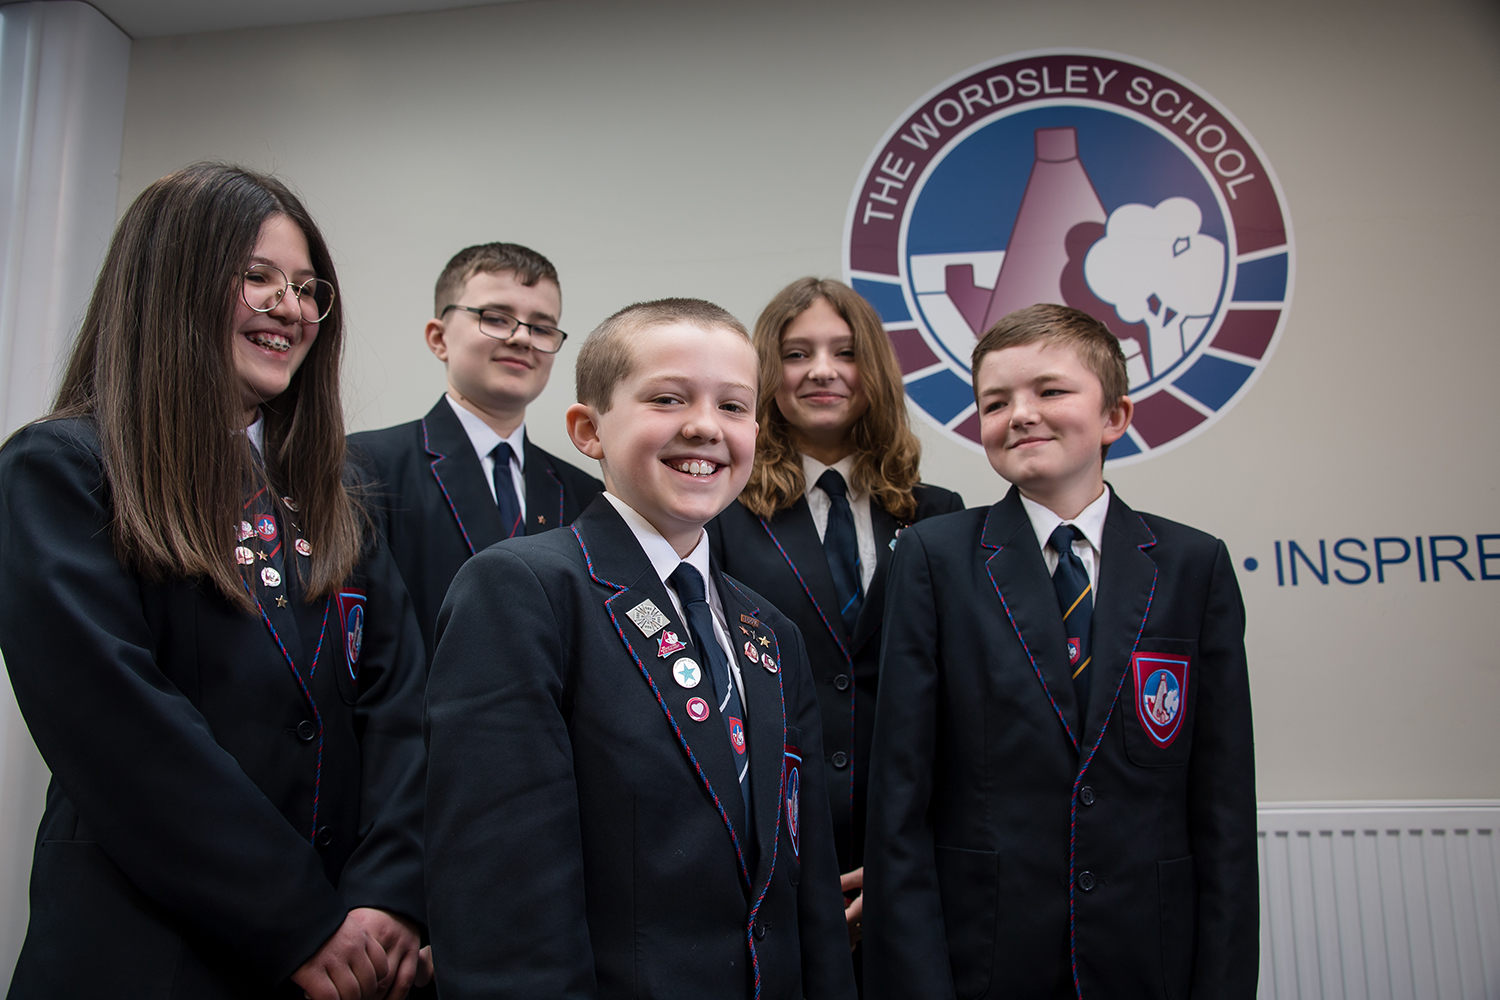 Five students in uniform standing in front of Wordsley School logo on the wall. Four students looking and smiling at boy at the front